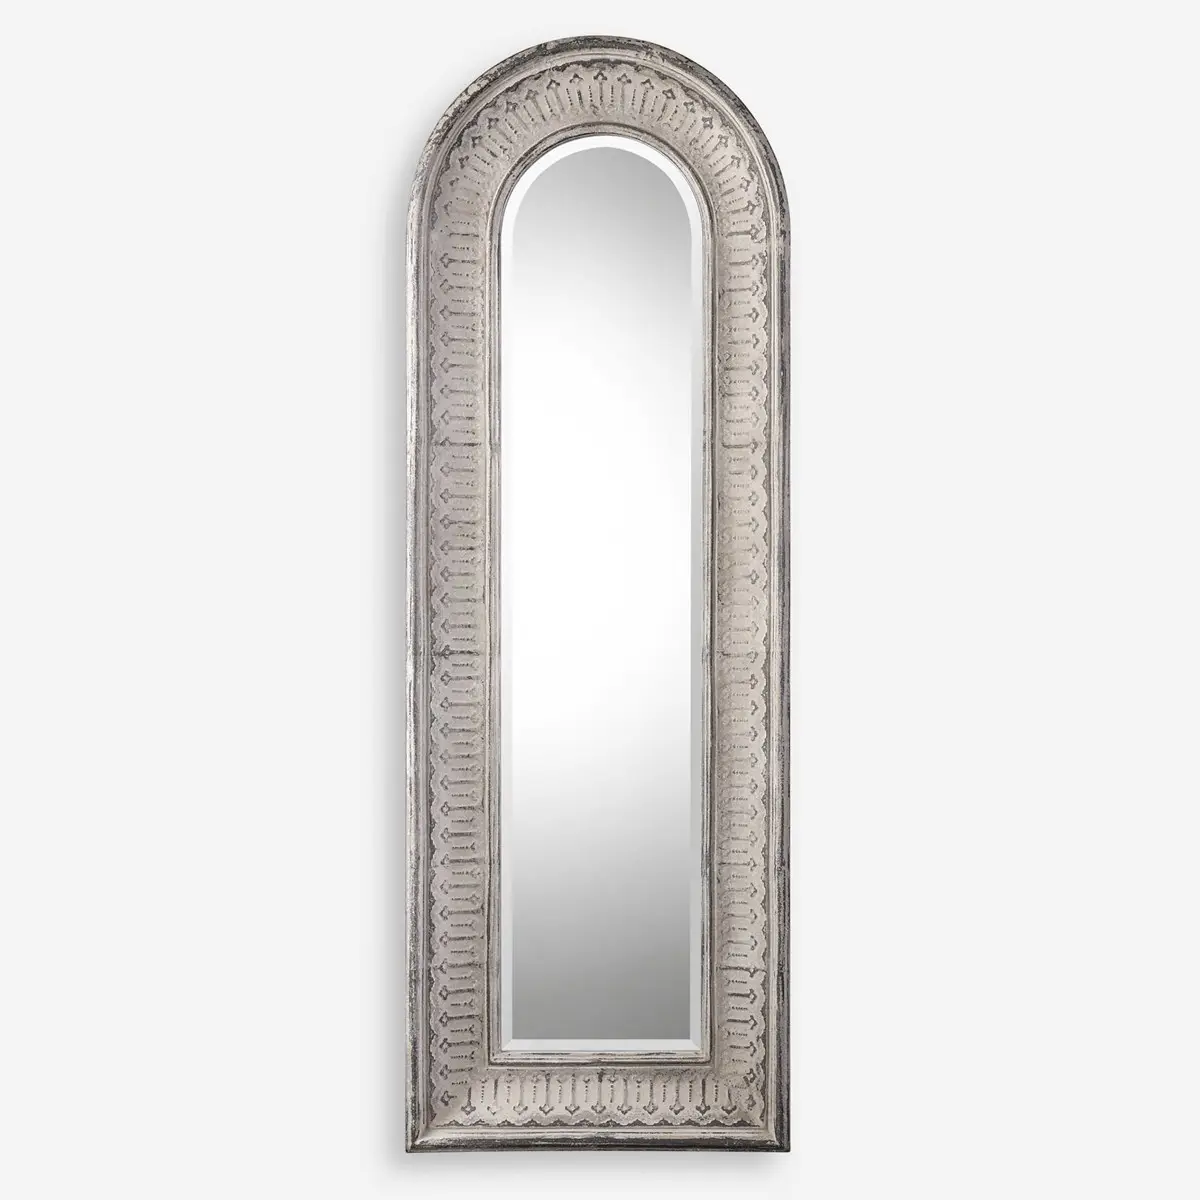 New unique iron frame arched shape wall mirror for bathroom and living room decoration hotel hallway wall decor make up mirror